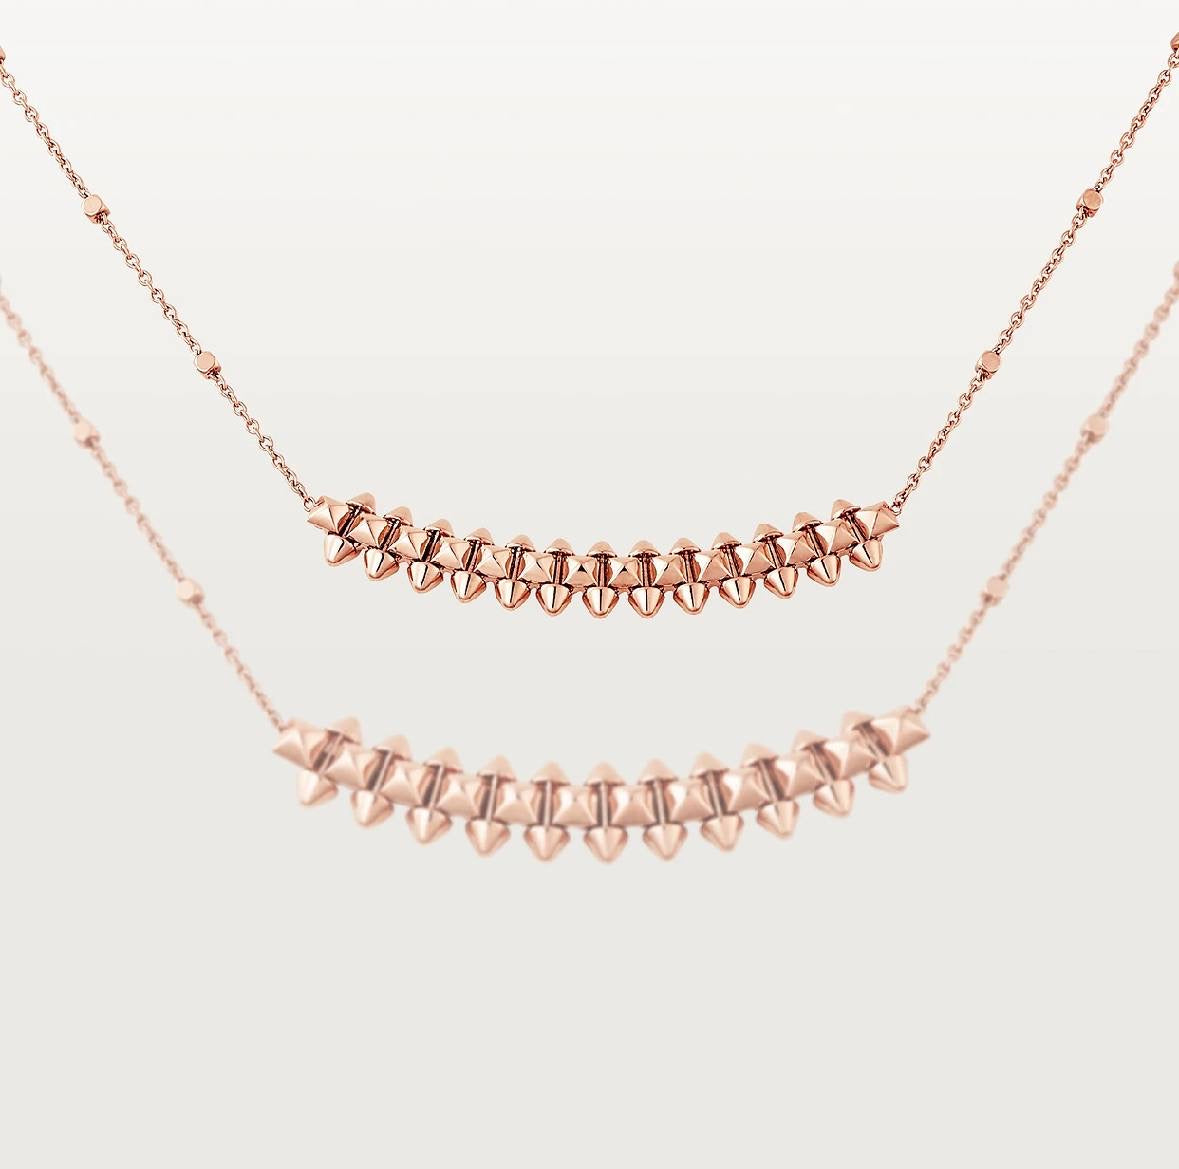 Cartier Clash Necklace, Small Model “Rose Gold”